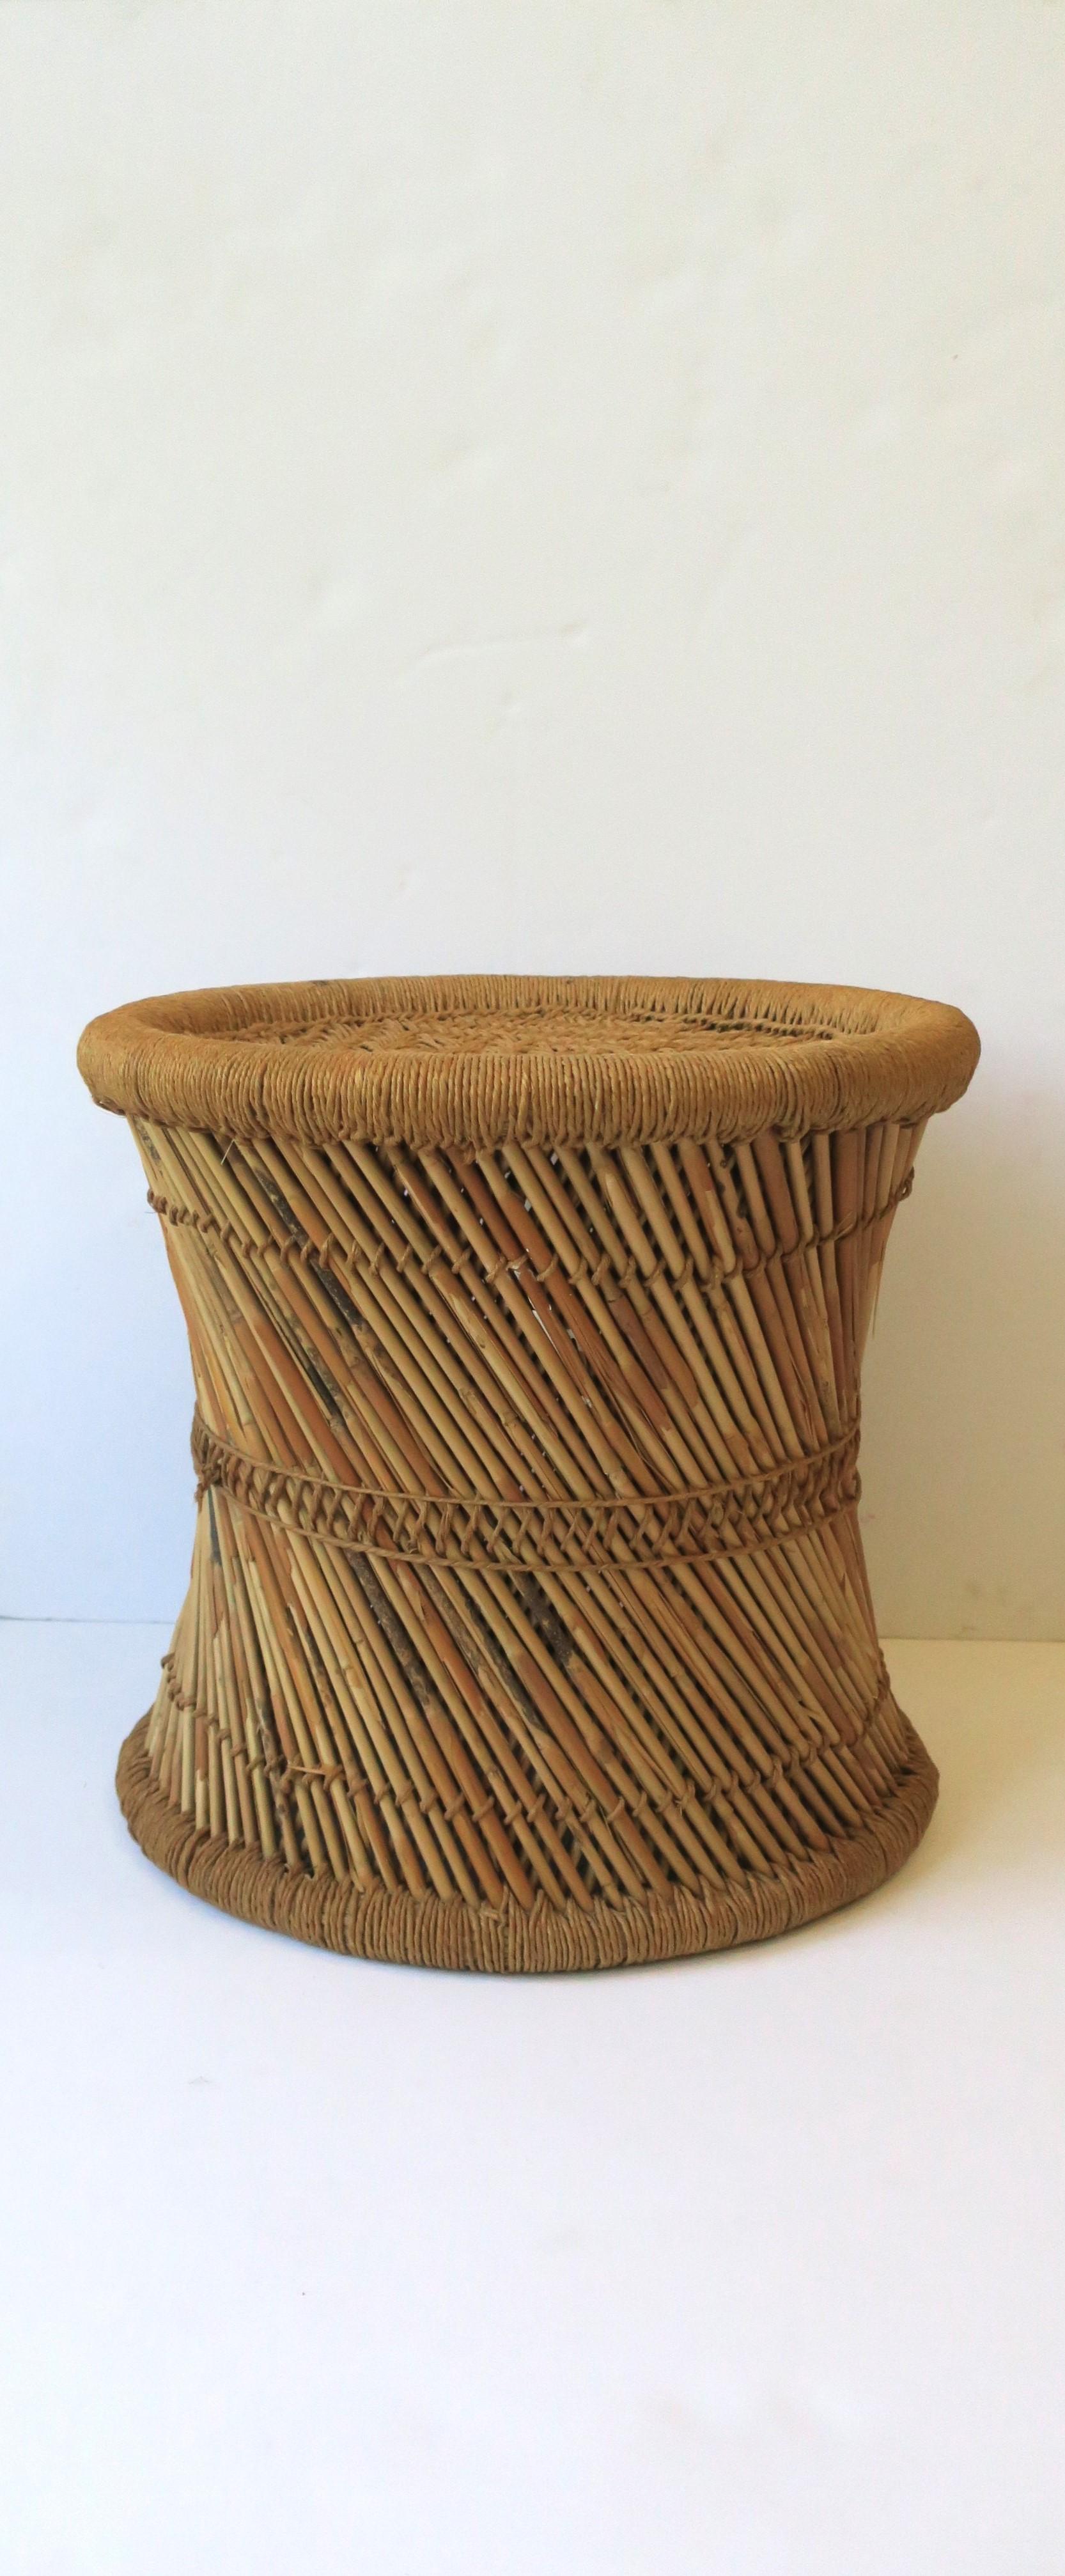 A vintage wicker pencil reed and glass top drinks side table or stool in the Anglo Raj style, circa 20th century, India. Stool is sturdy and well-made and can support a human being (as intended.) Stool can also double as side table with its